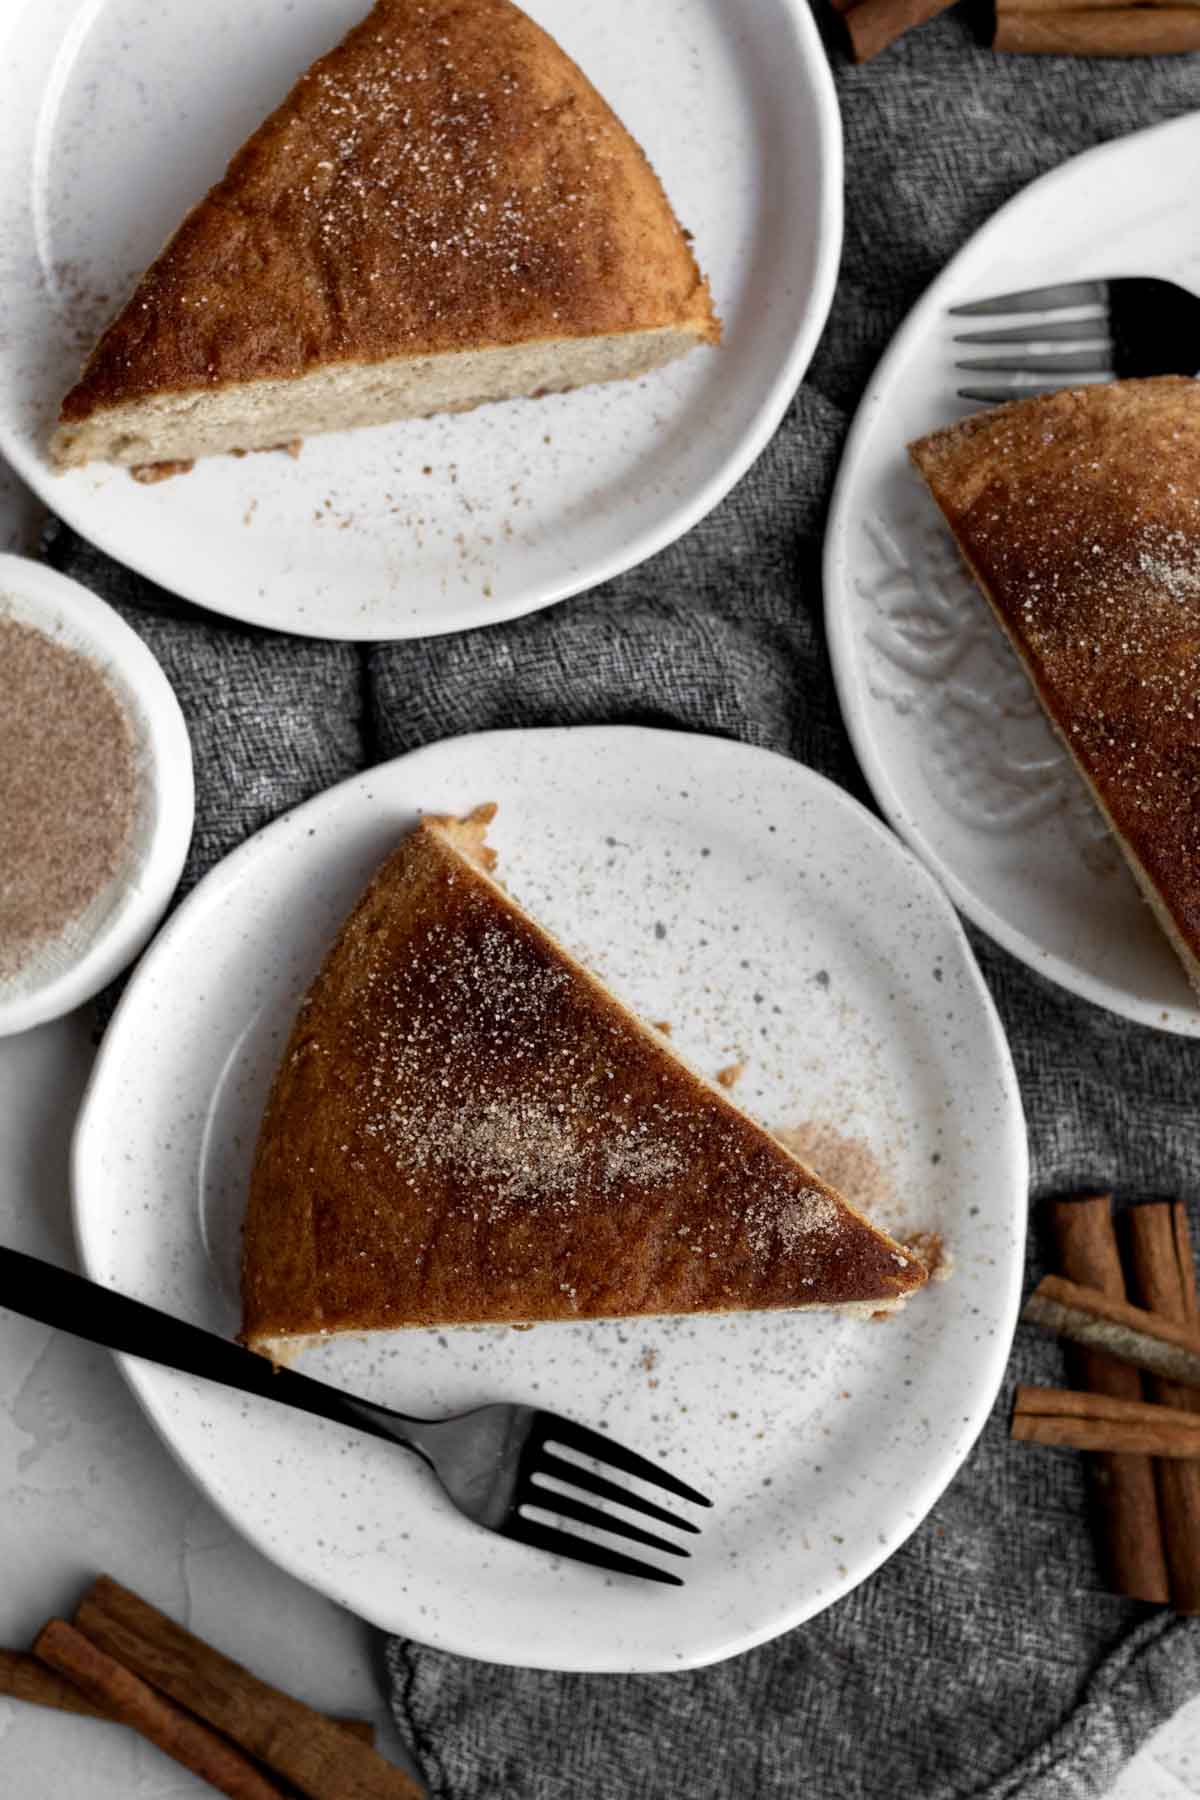 Three light and fluffy perfect slices of Cinnamon Tea Cake with delicious cinnamon sugar topping.